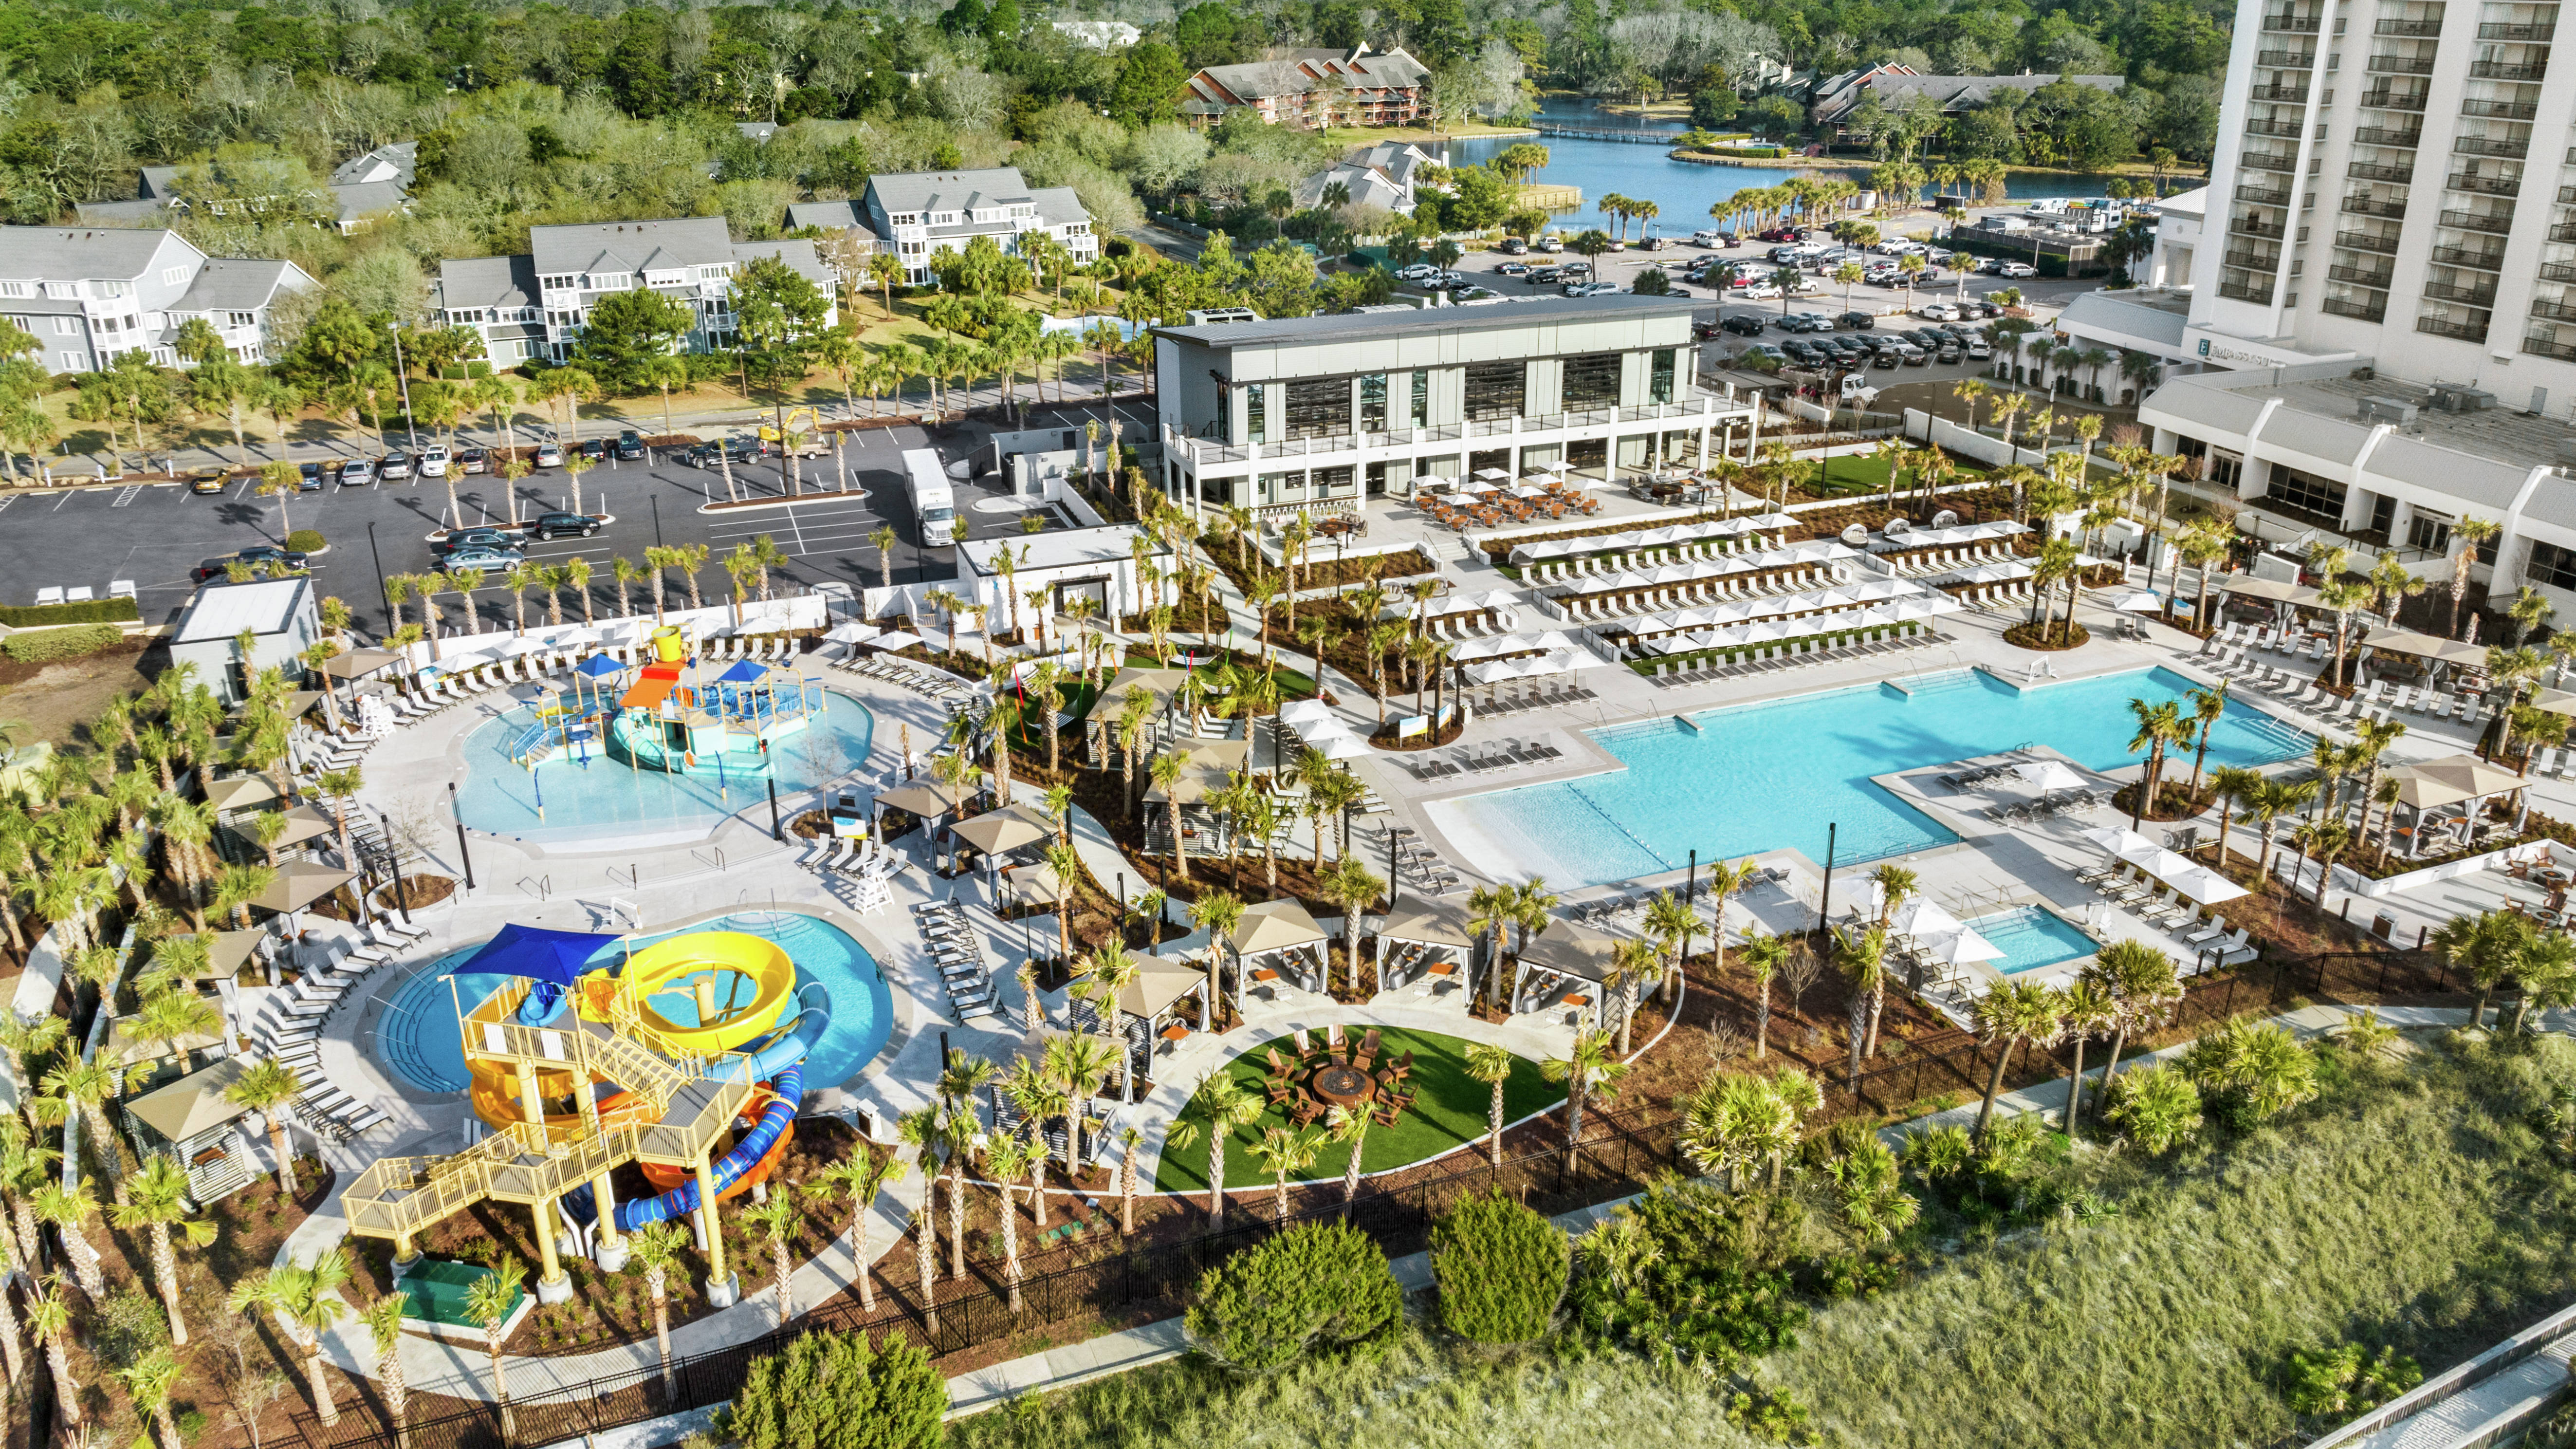 Aerial view of hotel grounds featuring large pools and kids splash area